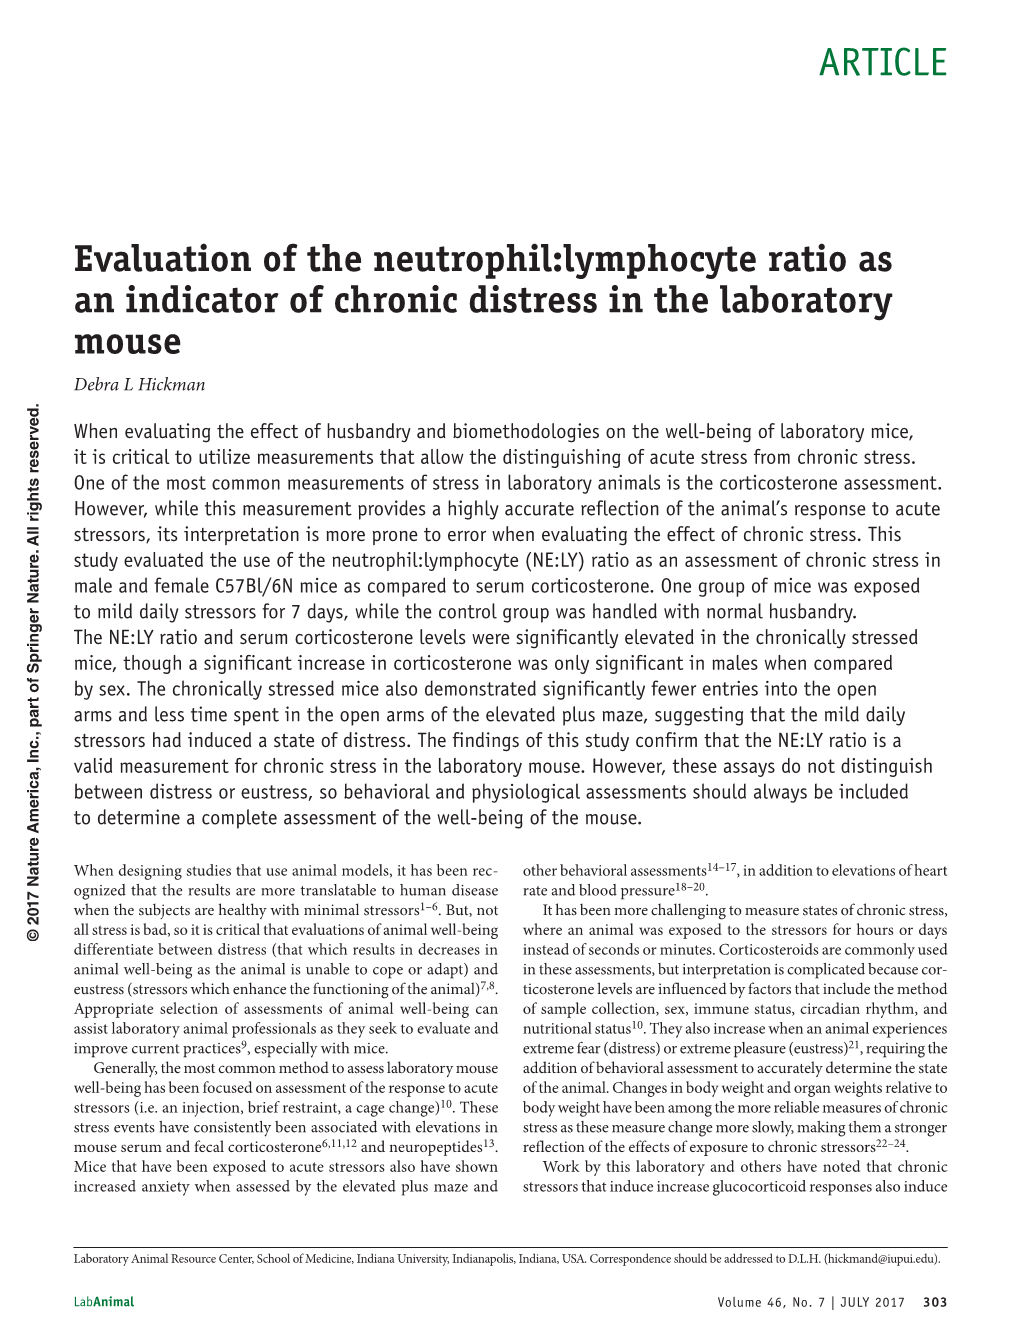 Evaluation of the Neutrophil: Lymphocyte Ratio As an Indicator of Chronic Distress in the Laboratory Mouse